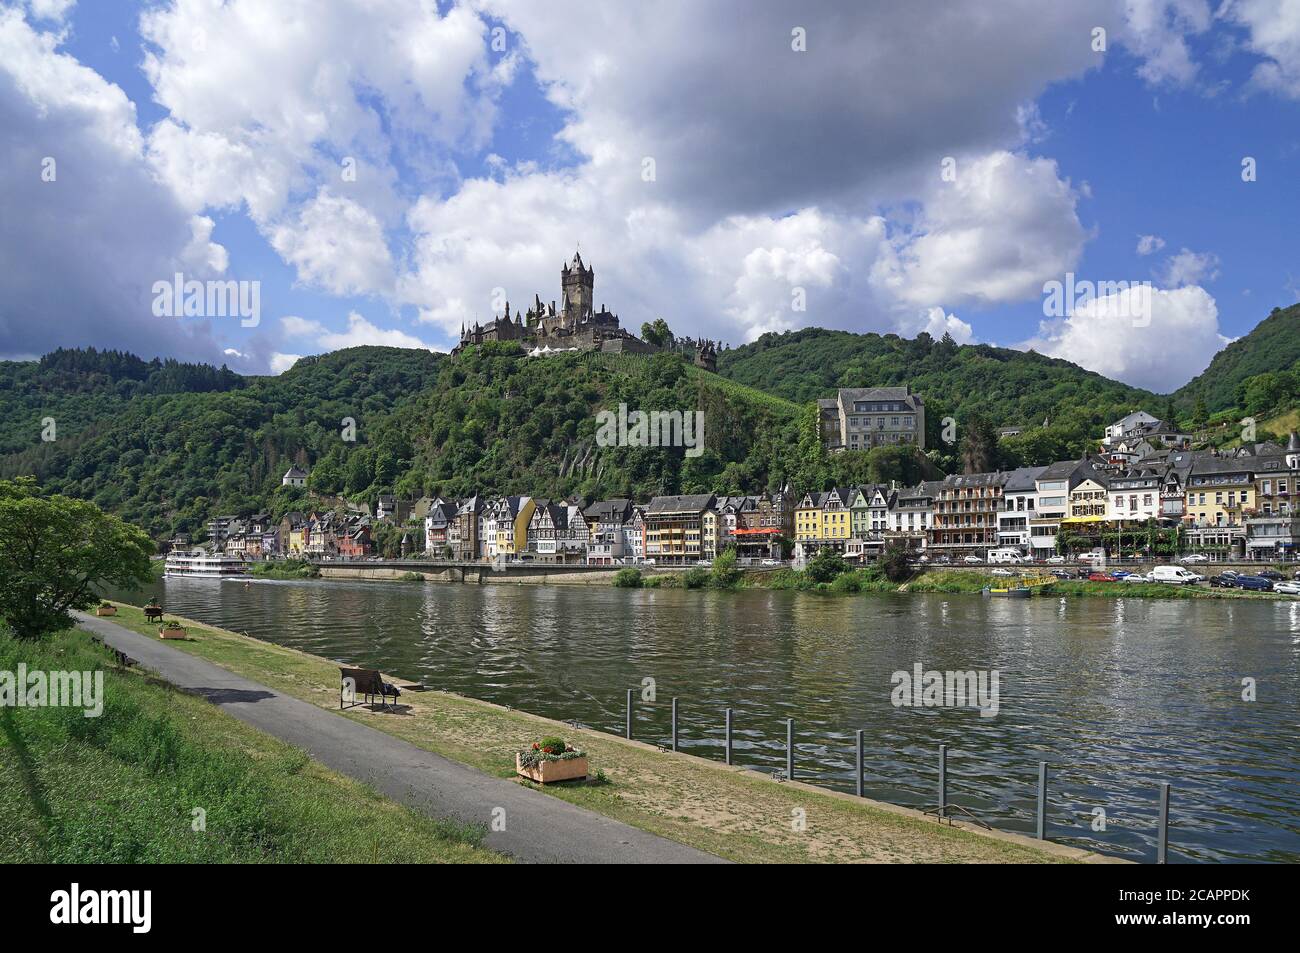 The village of Cochem seen from the Skagerakbrücke, Germany Stock Photo